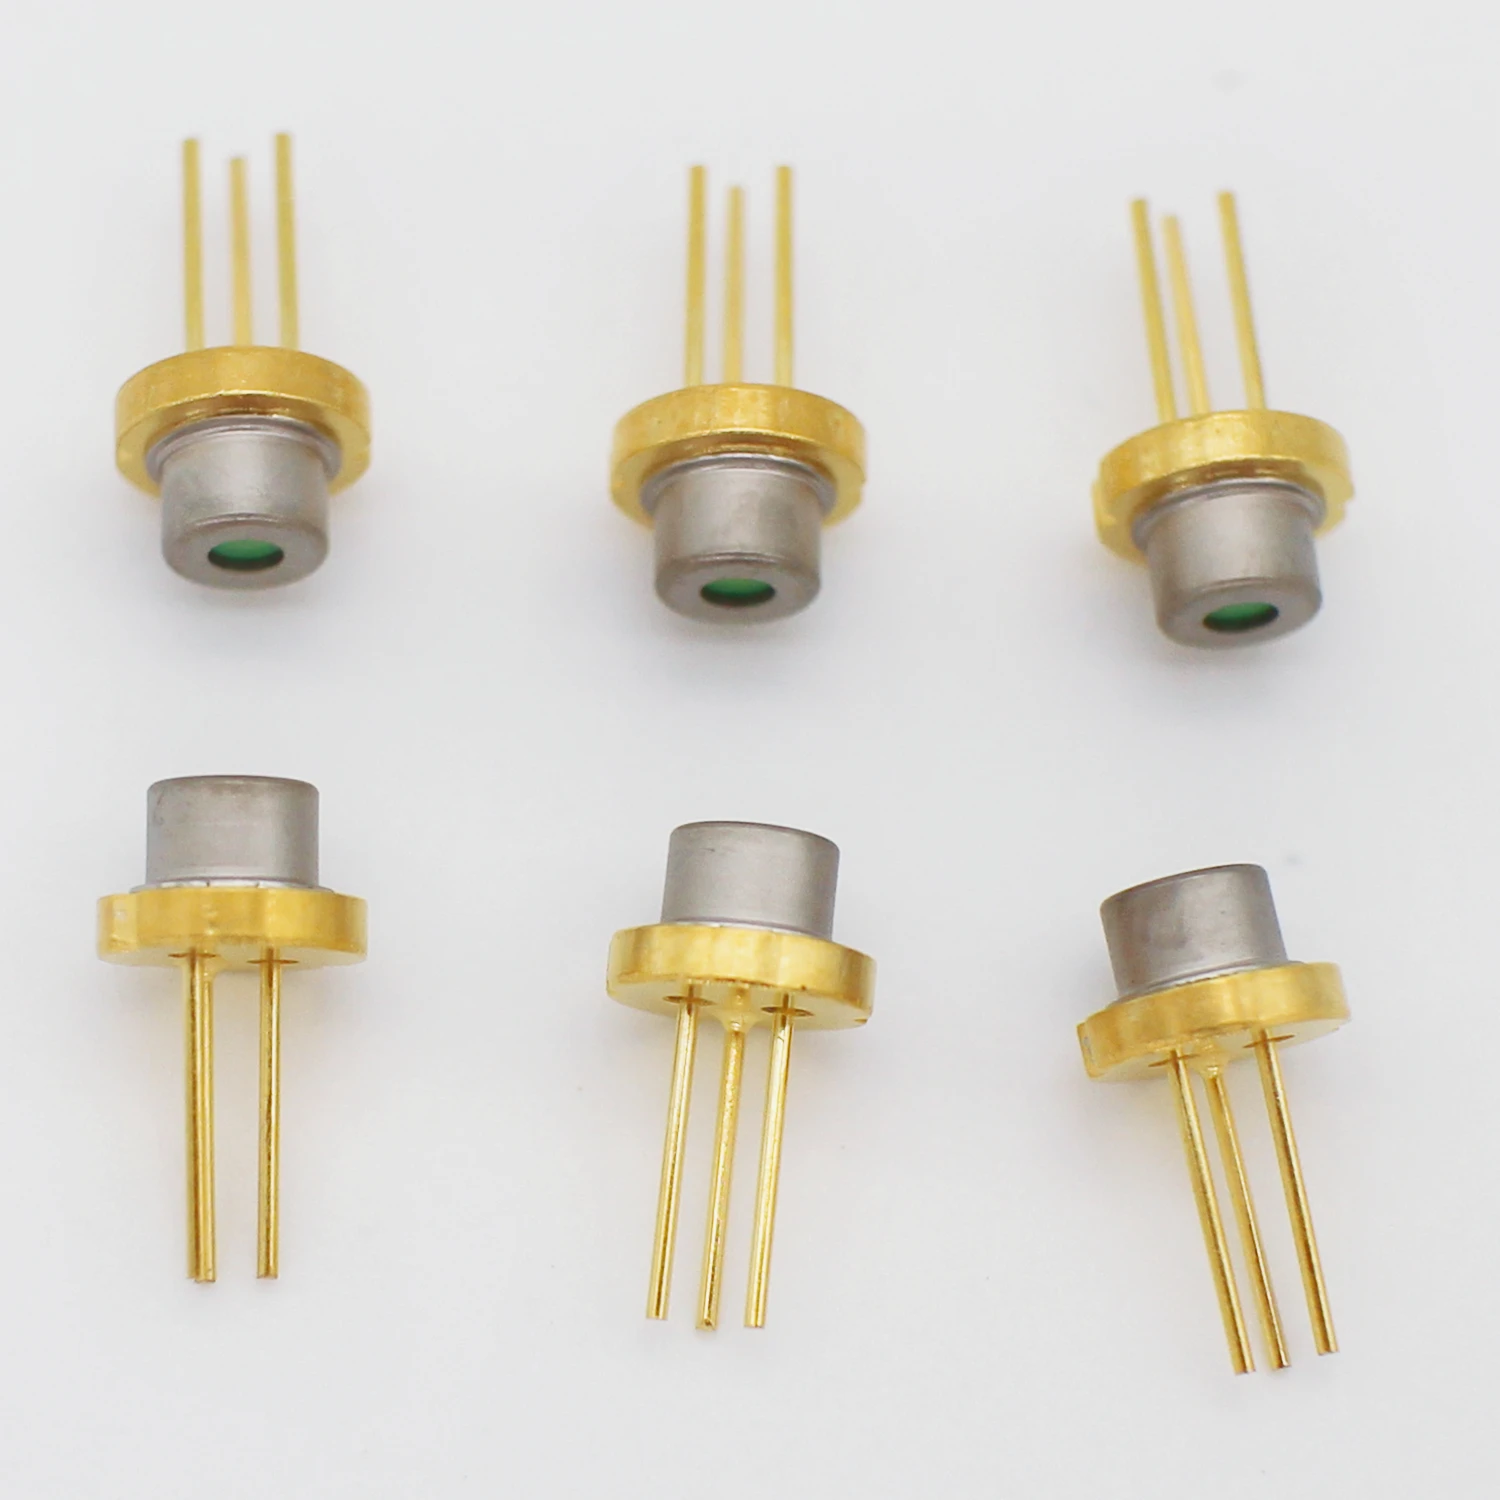 Manufacturers 20W laser diode TO 905nm pulsed laser diode single emitter